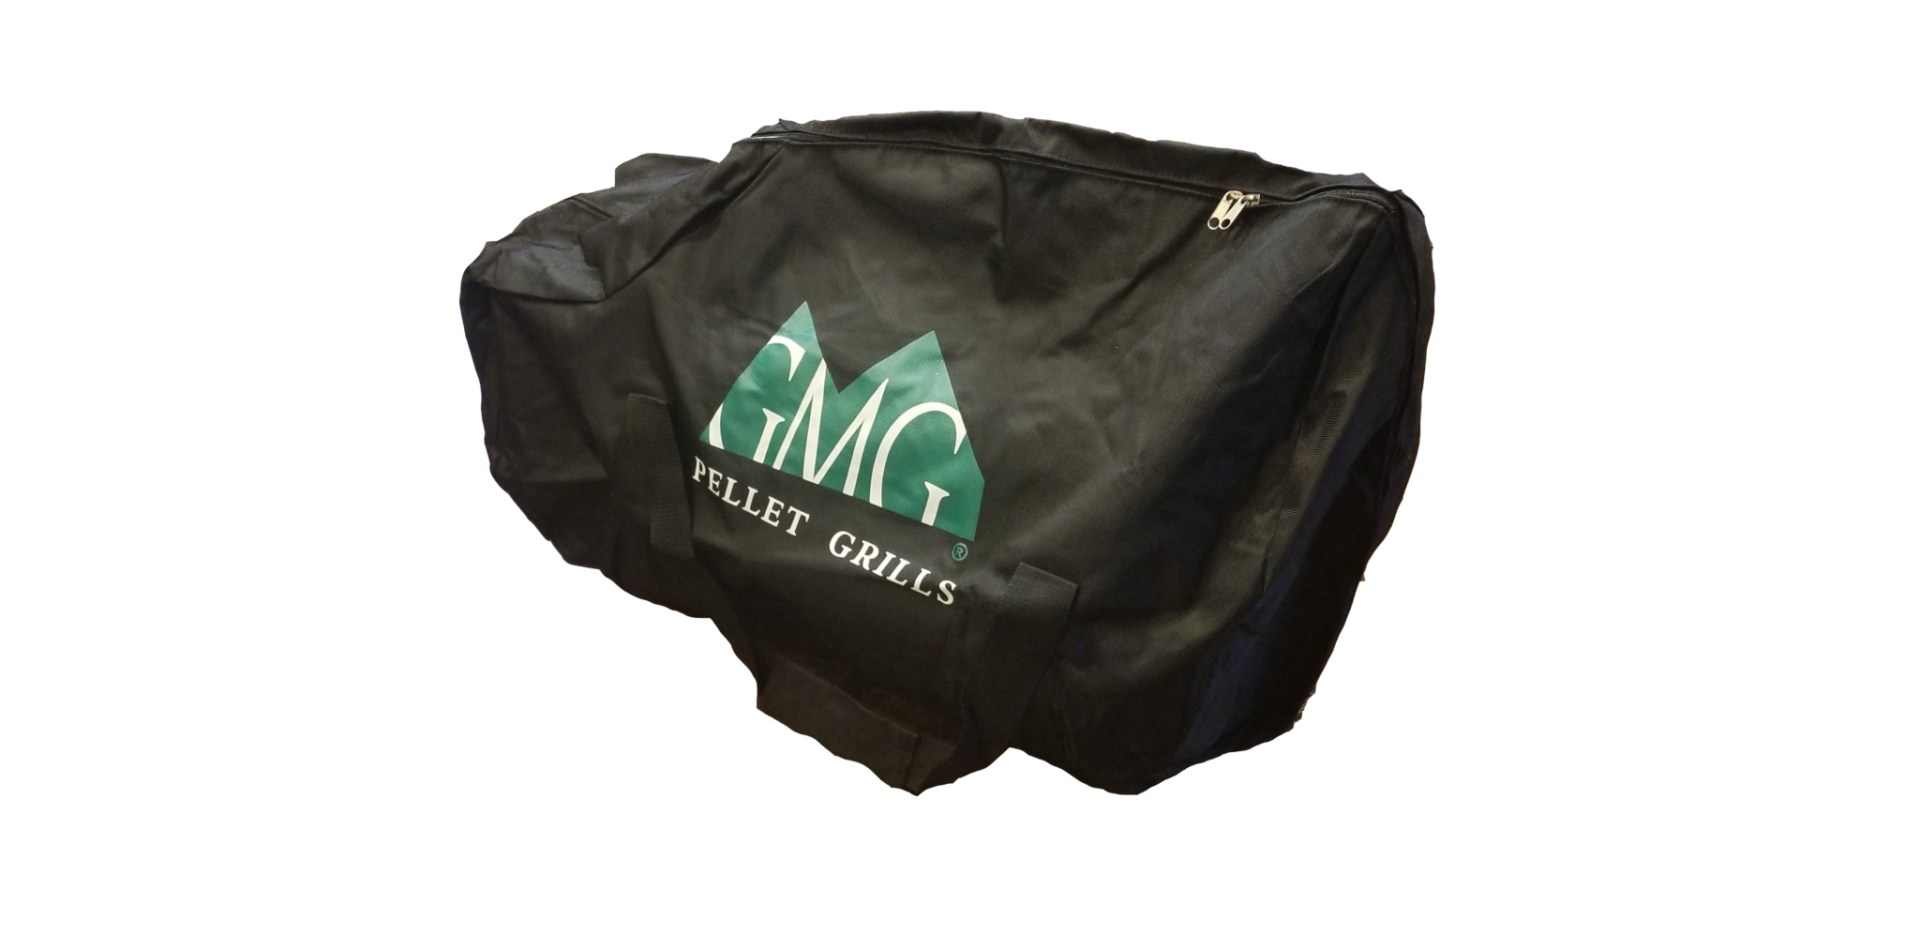 Discounted Home Show Demo Green Mountain Grills Davy Crockett Thermal Blanket 